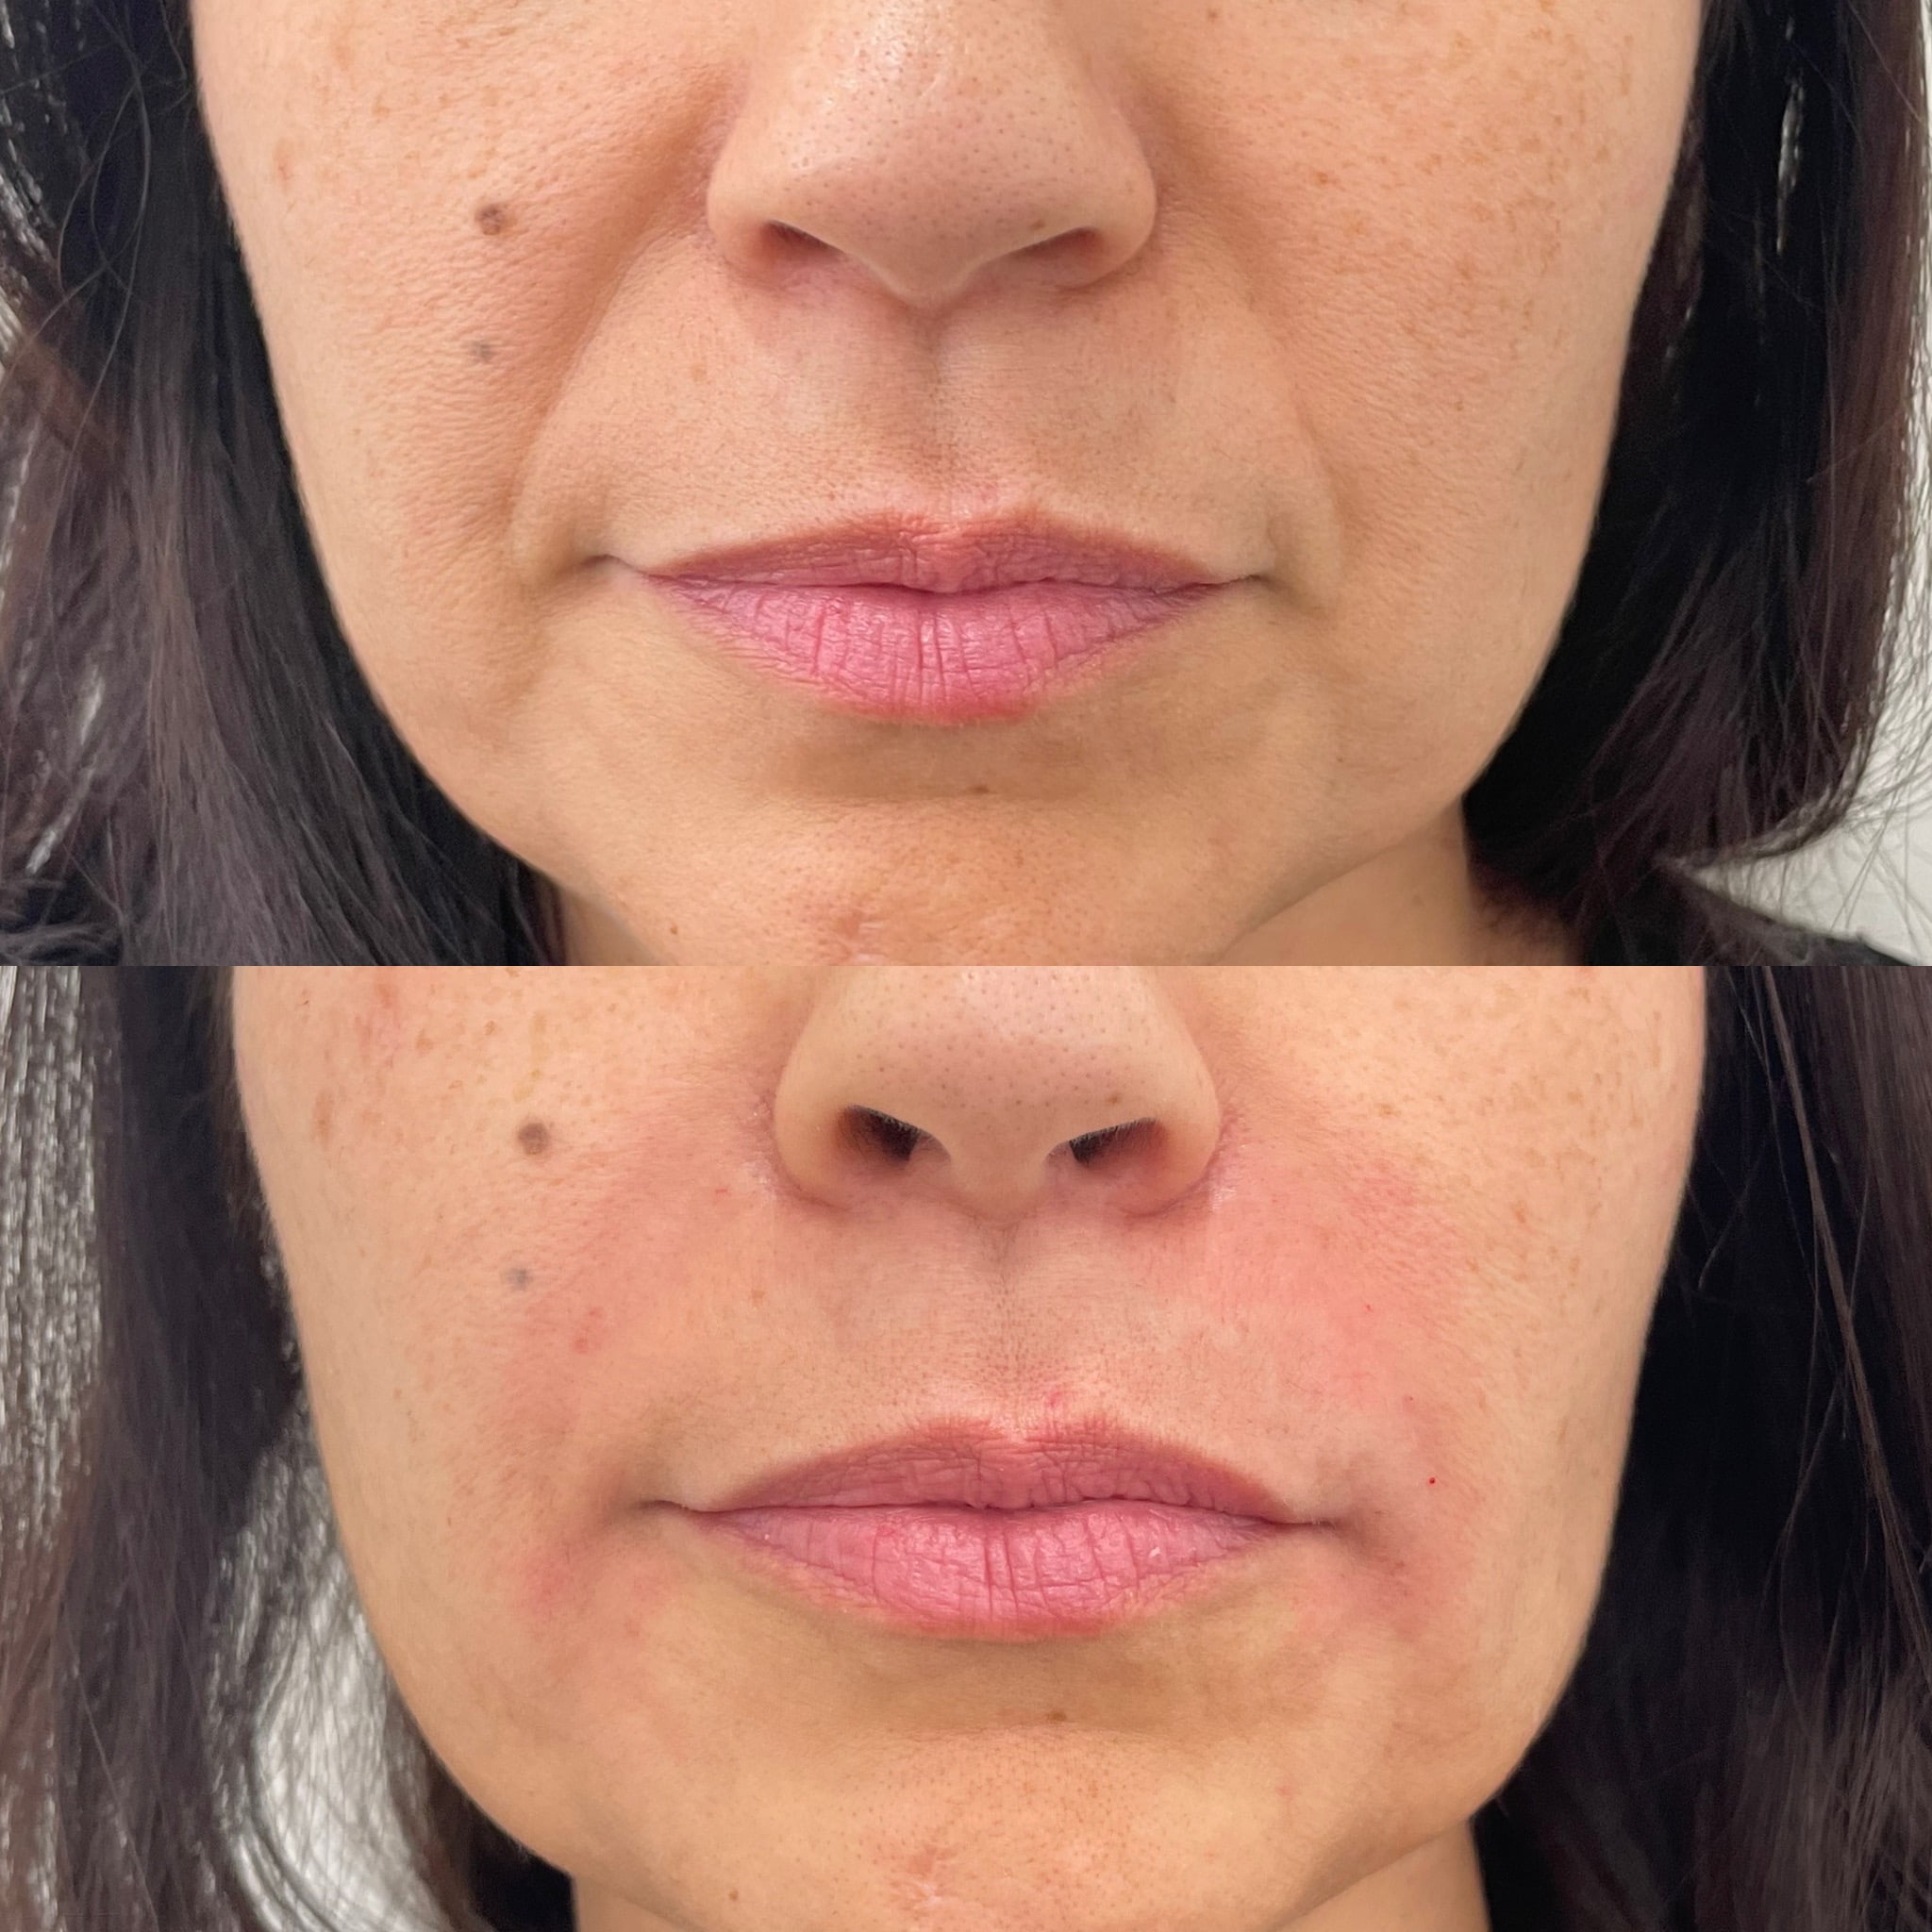 Before and After Fillers Smile lines treatment | Beauty Boost Med Spa at Newport Beach, CA